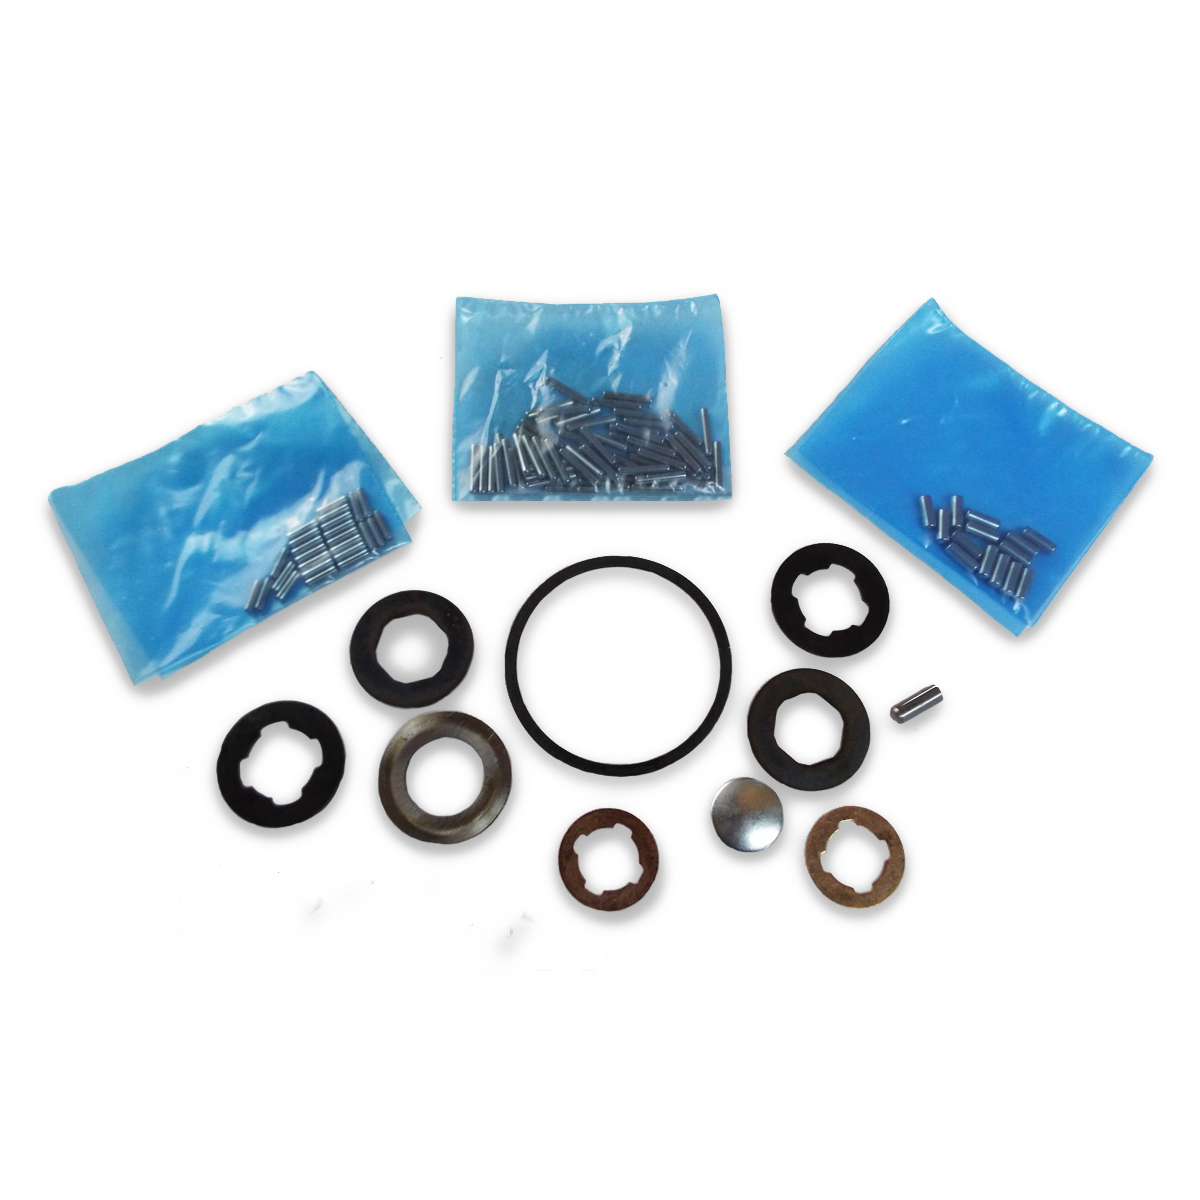 1940-1954 Transmission Small Parts Kit Chevrolet and GMC Pickup Truck